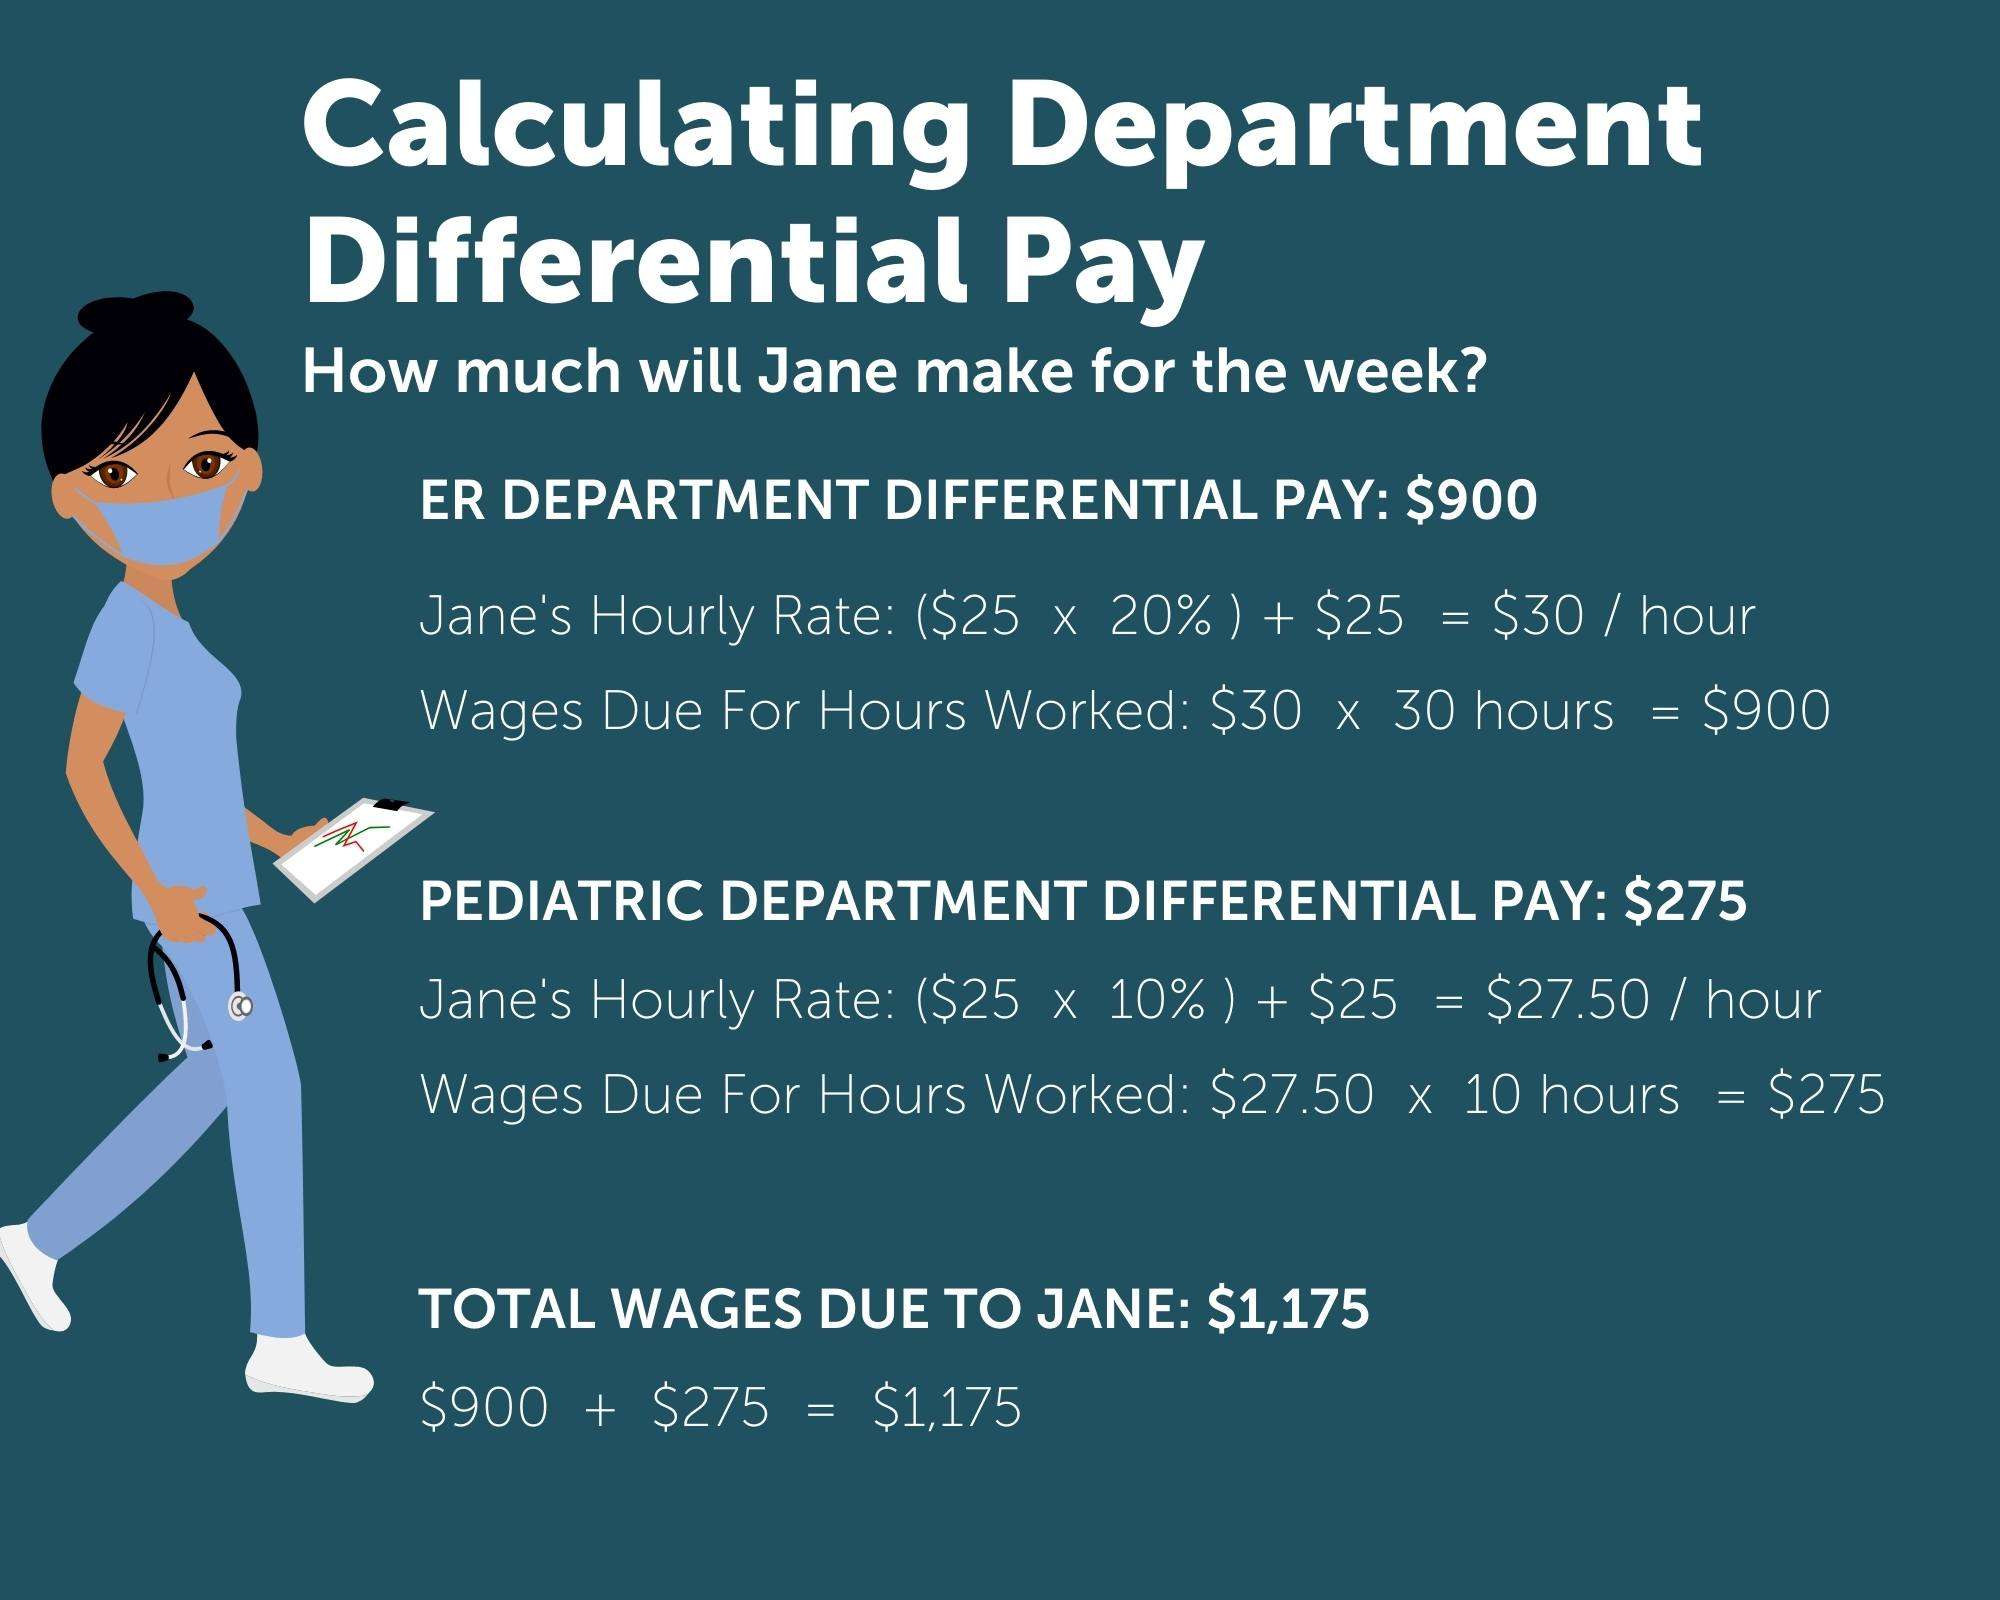 Calculating Department Differential Pay